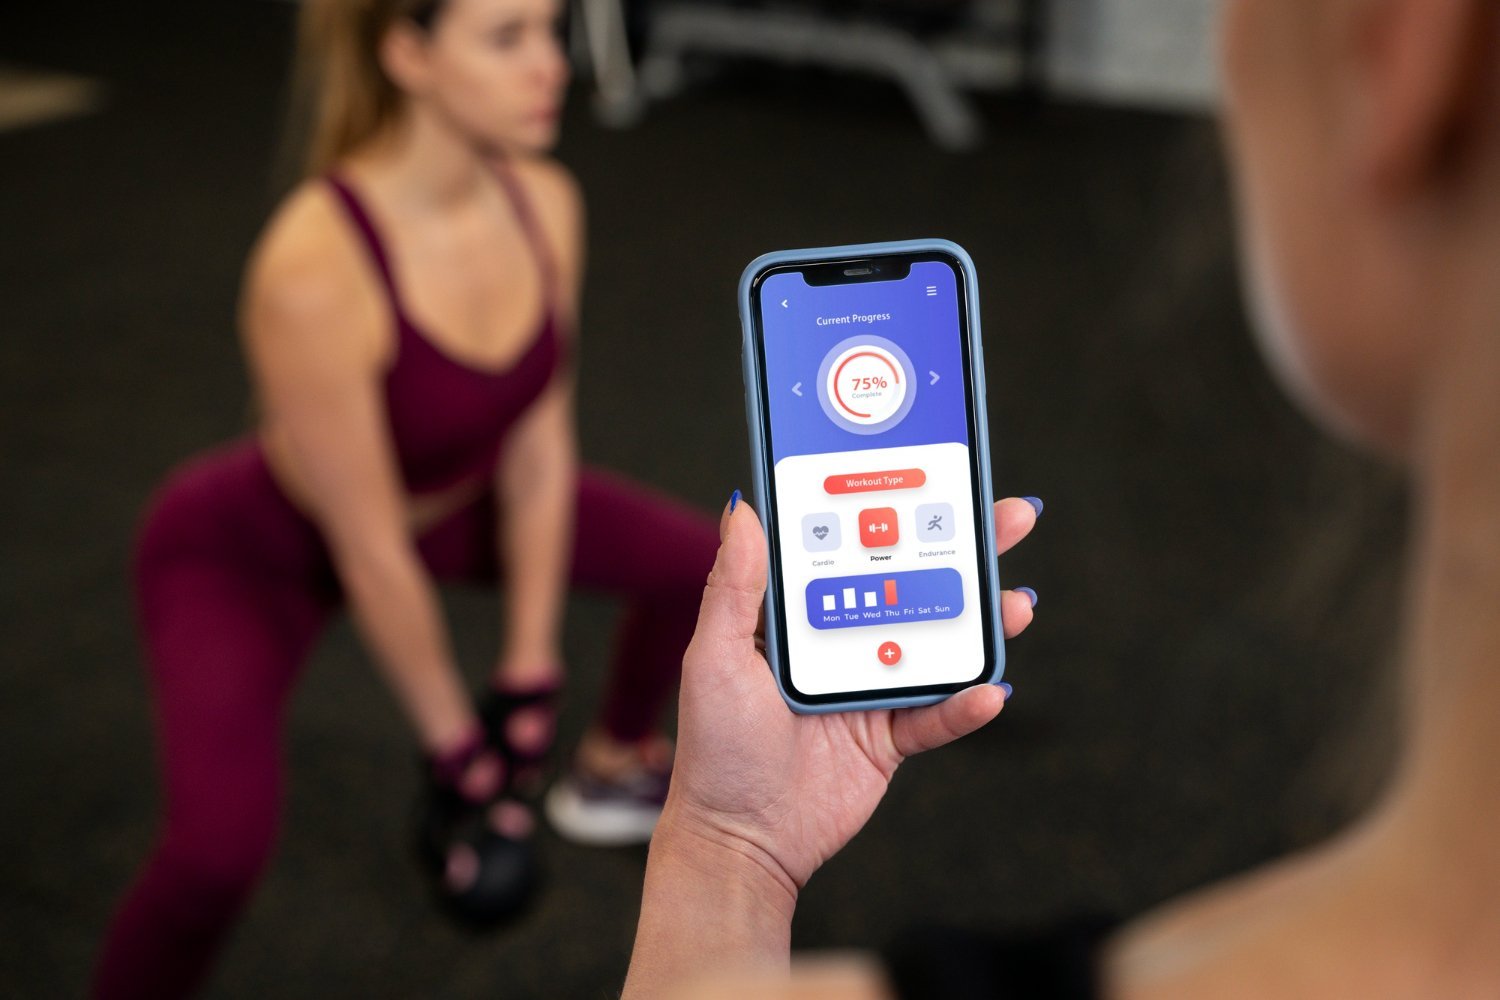 The Best Fitness and Health Apps